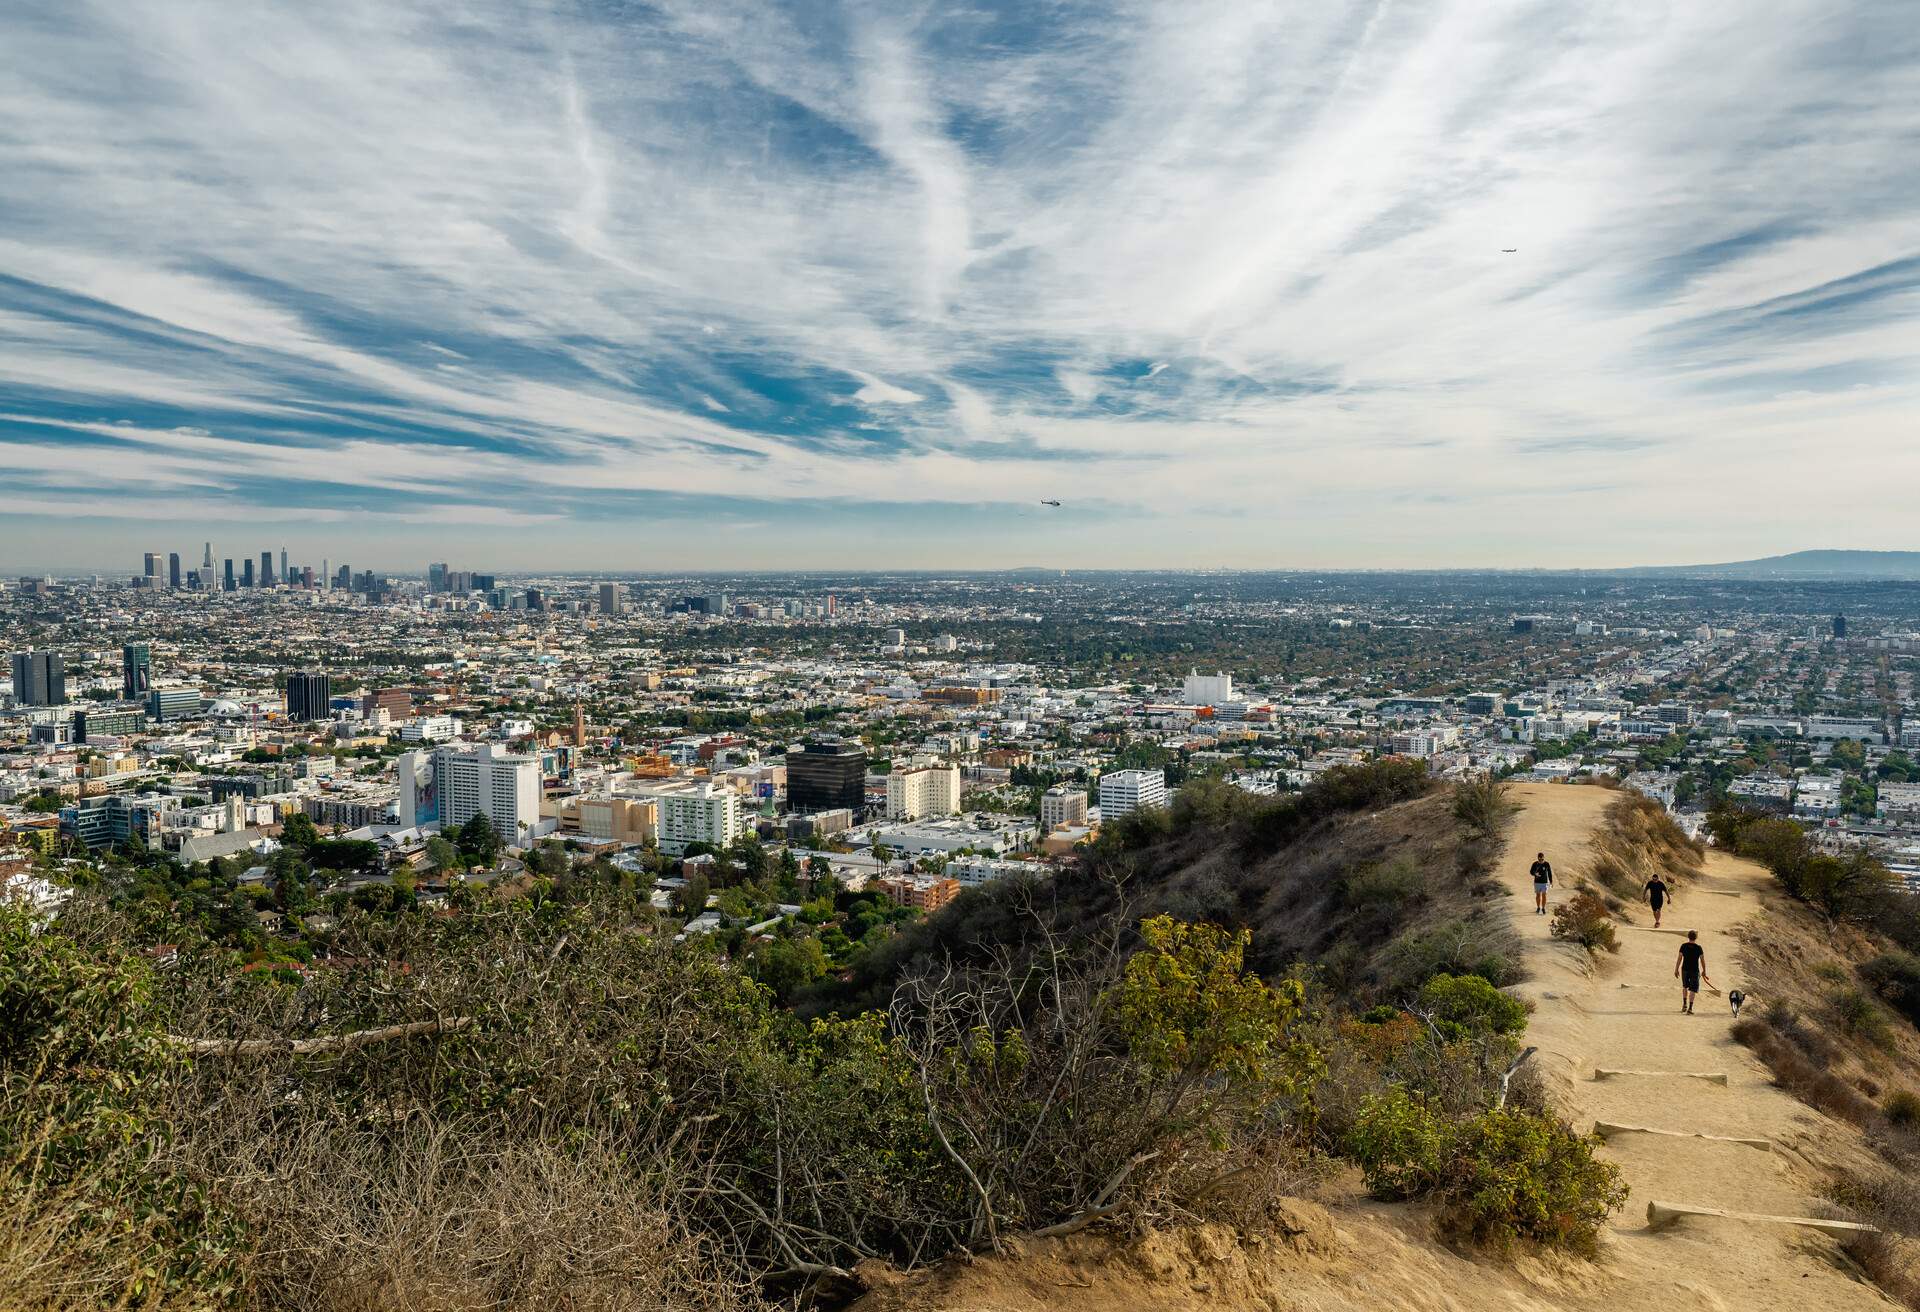 DEST_USA_CALIFORNIA_LOS ANGELES_HOLLYWOOD_RUNYON CANYON PARK-GettyImages-1074051388